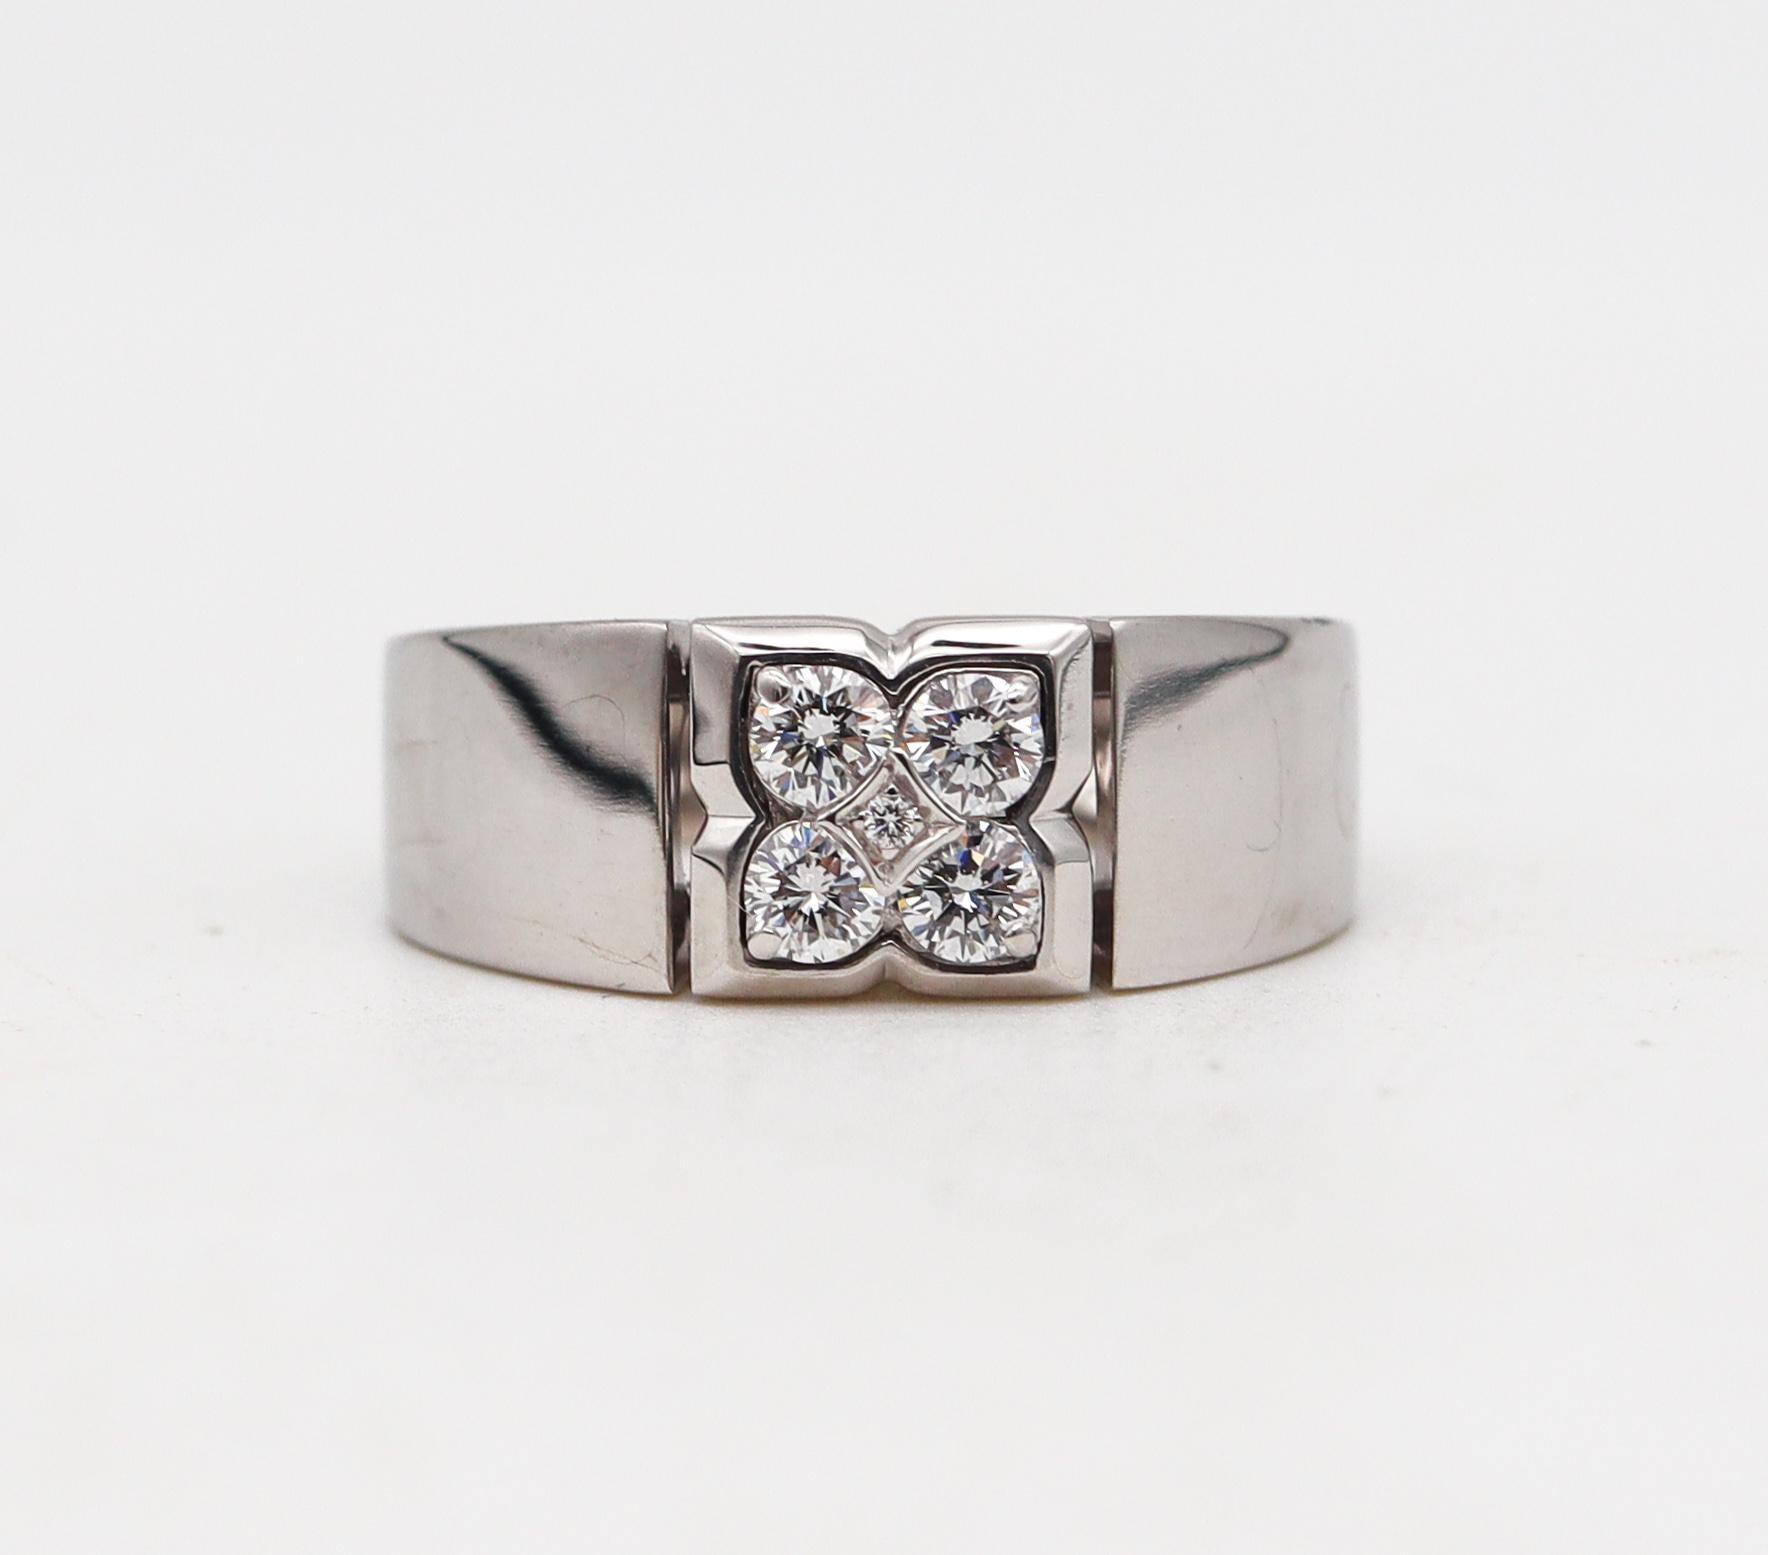 Quatrefoil Ring designed by Van Cleef & Arpels.

An elegant contemporary ring, created at the maison of Van Cleefs & Arpels in Paris France.  Crafted with a bold solid look in white gold of 18 karats with high polished finish. This quatrefoil ring